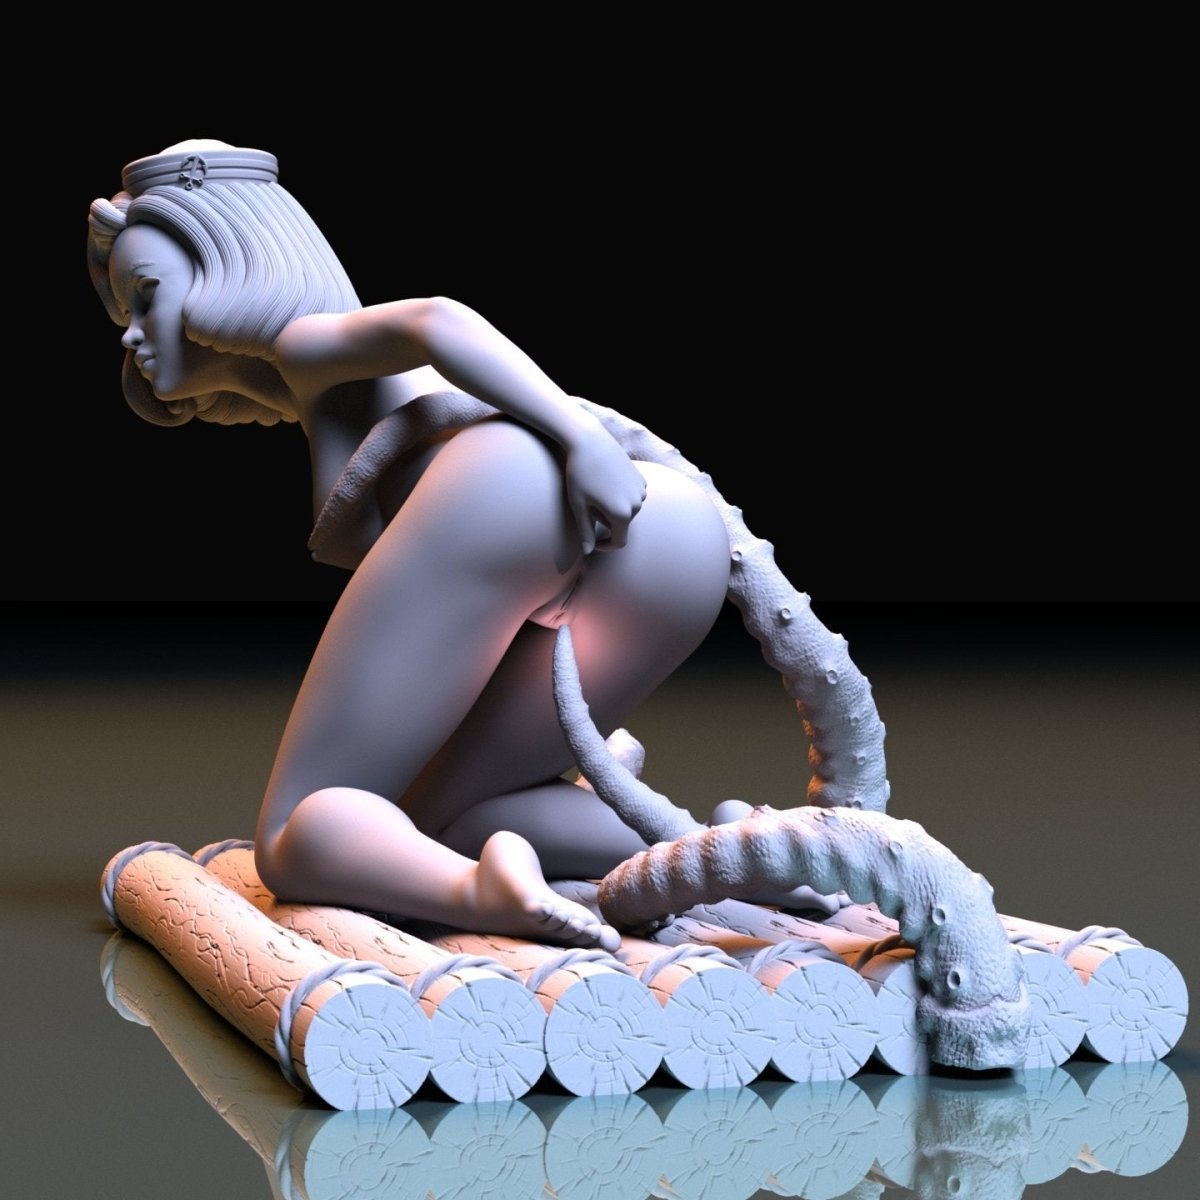 NSFW Resin Miniature Sailor Girl and tentacles NSFW 3D Printed Figurine Fanart Unpainted Miniature Collectibles